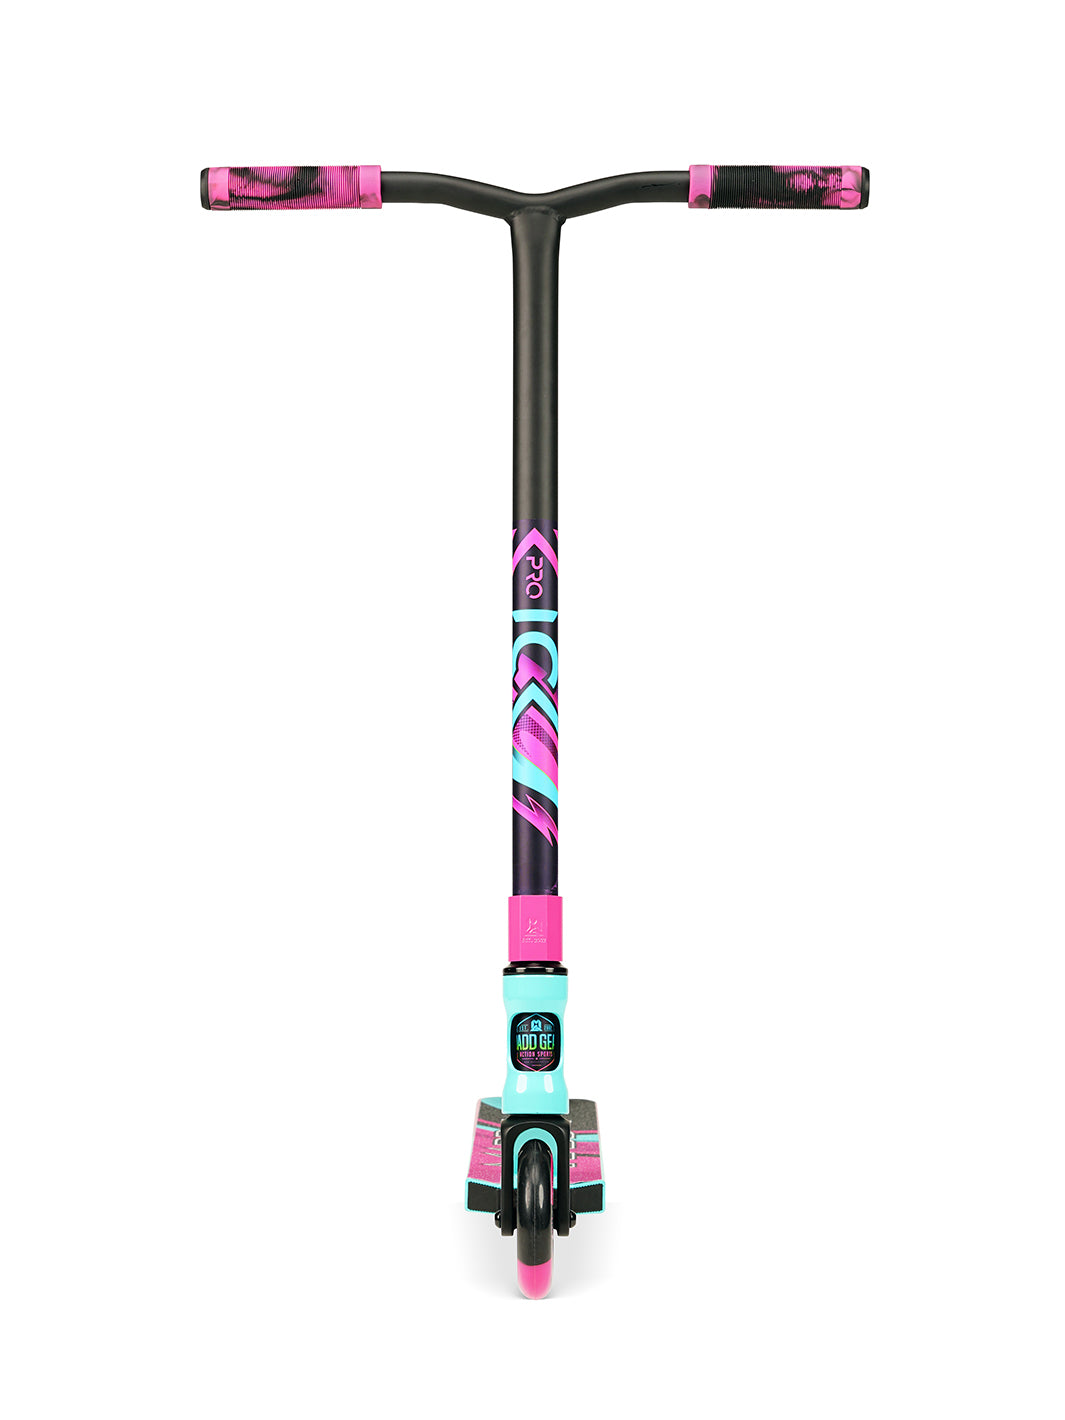 Madd Gear Kick Pro Stunt Scooter Teal Pink Complete Strong Skate parkl